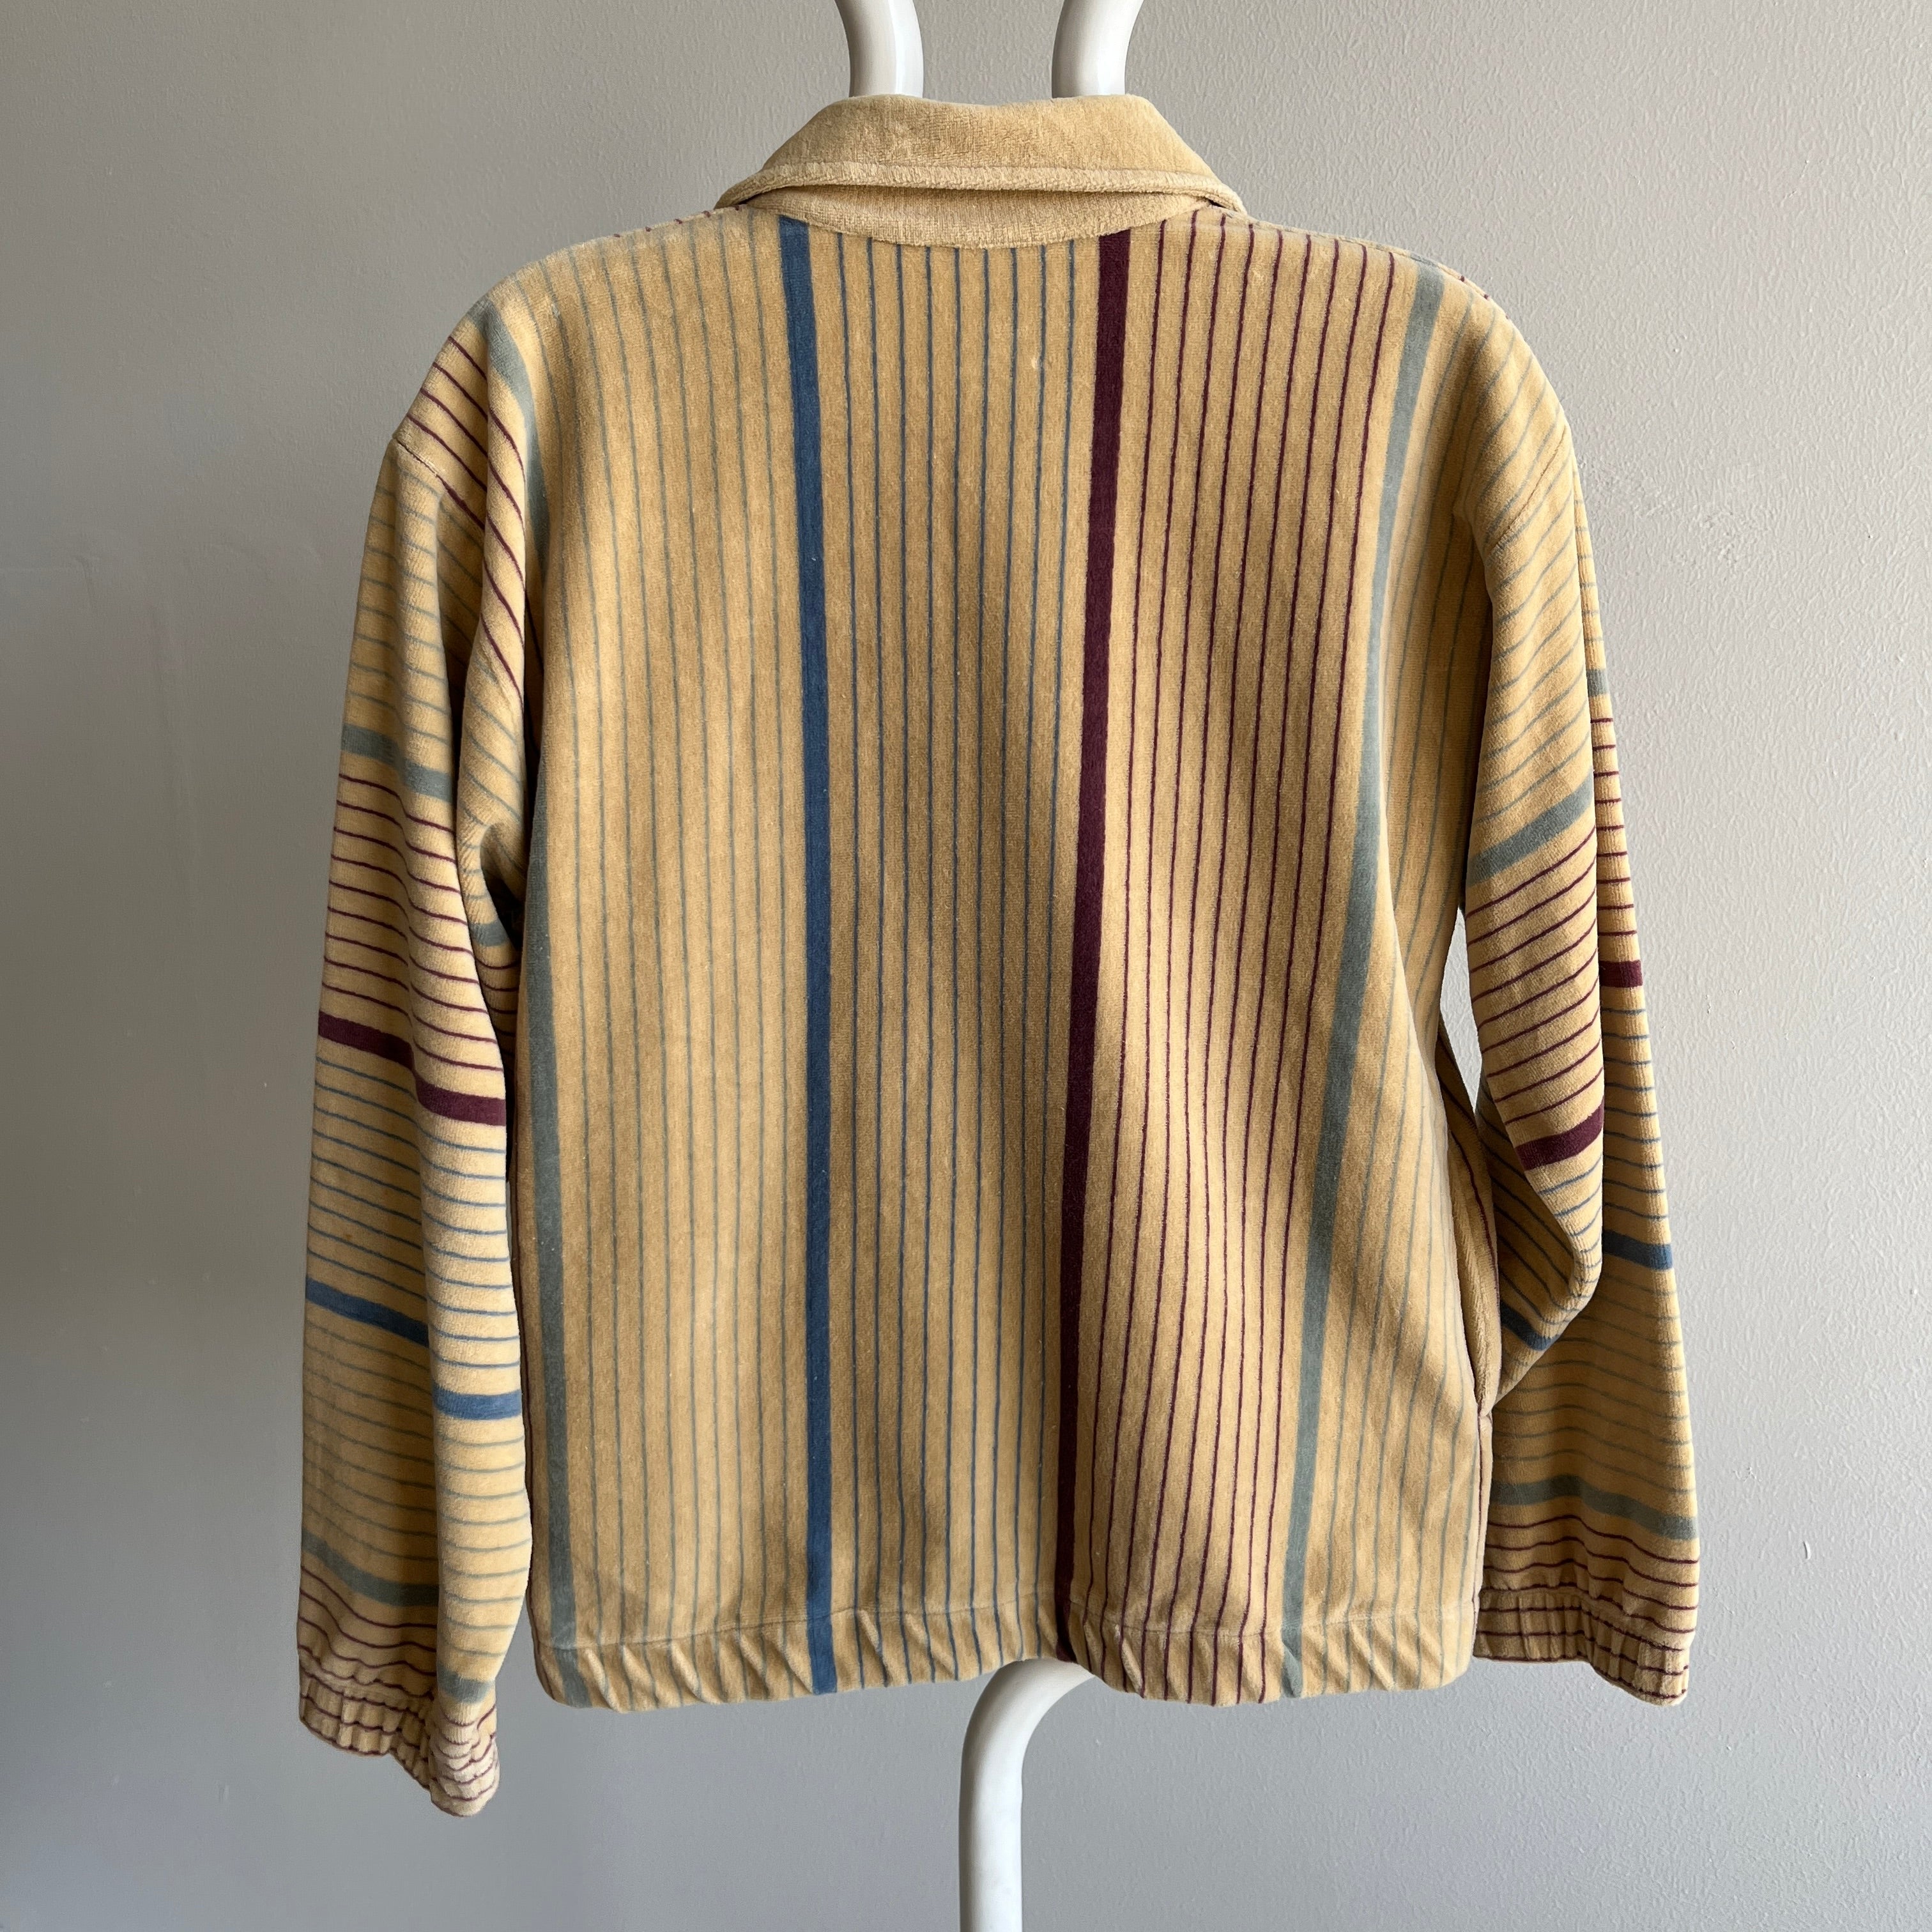 1980s Striped Velour Mock Neck Zip Up with Rust Age Spotting